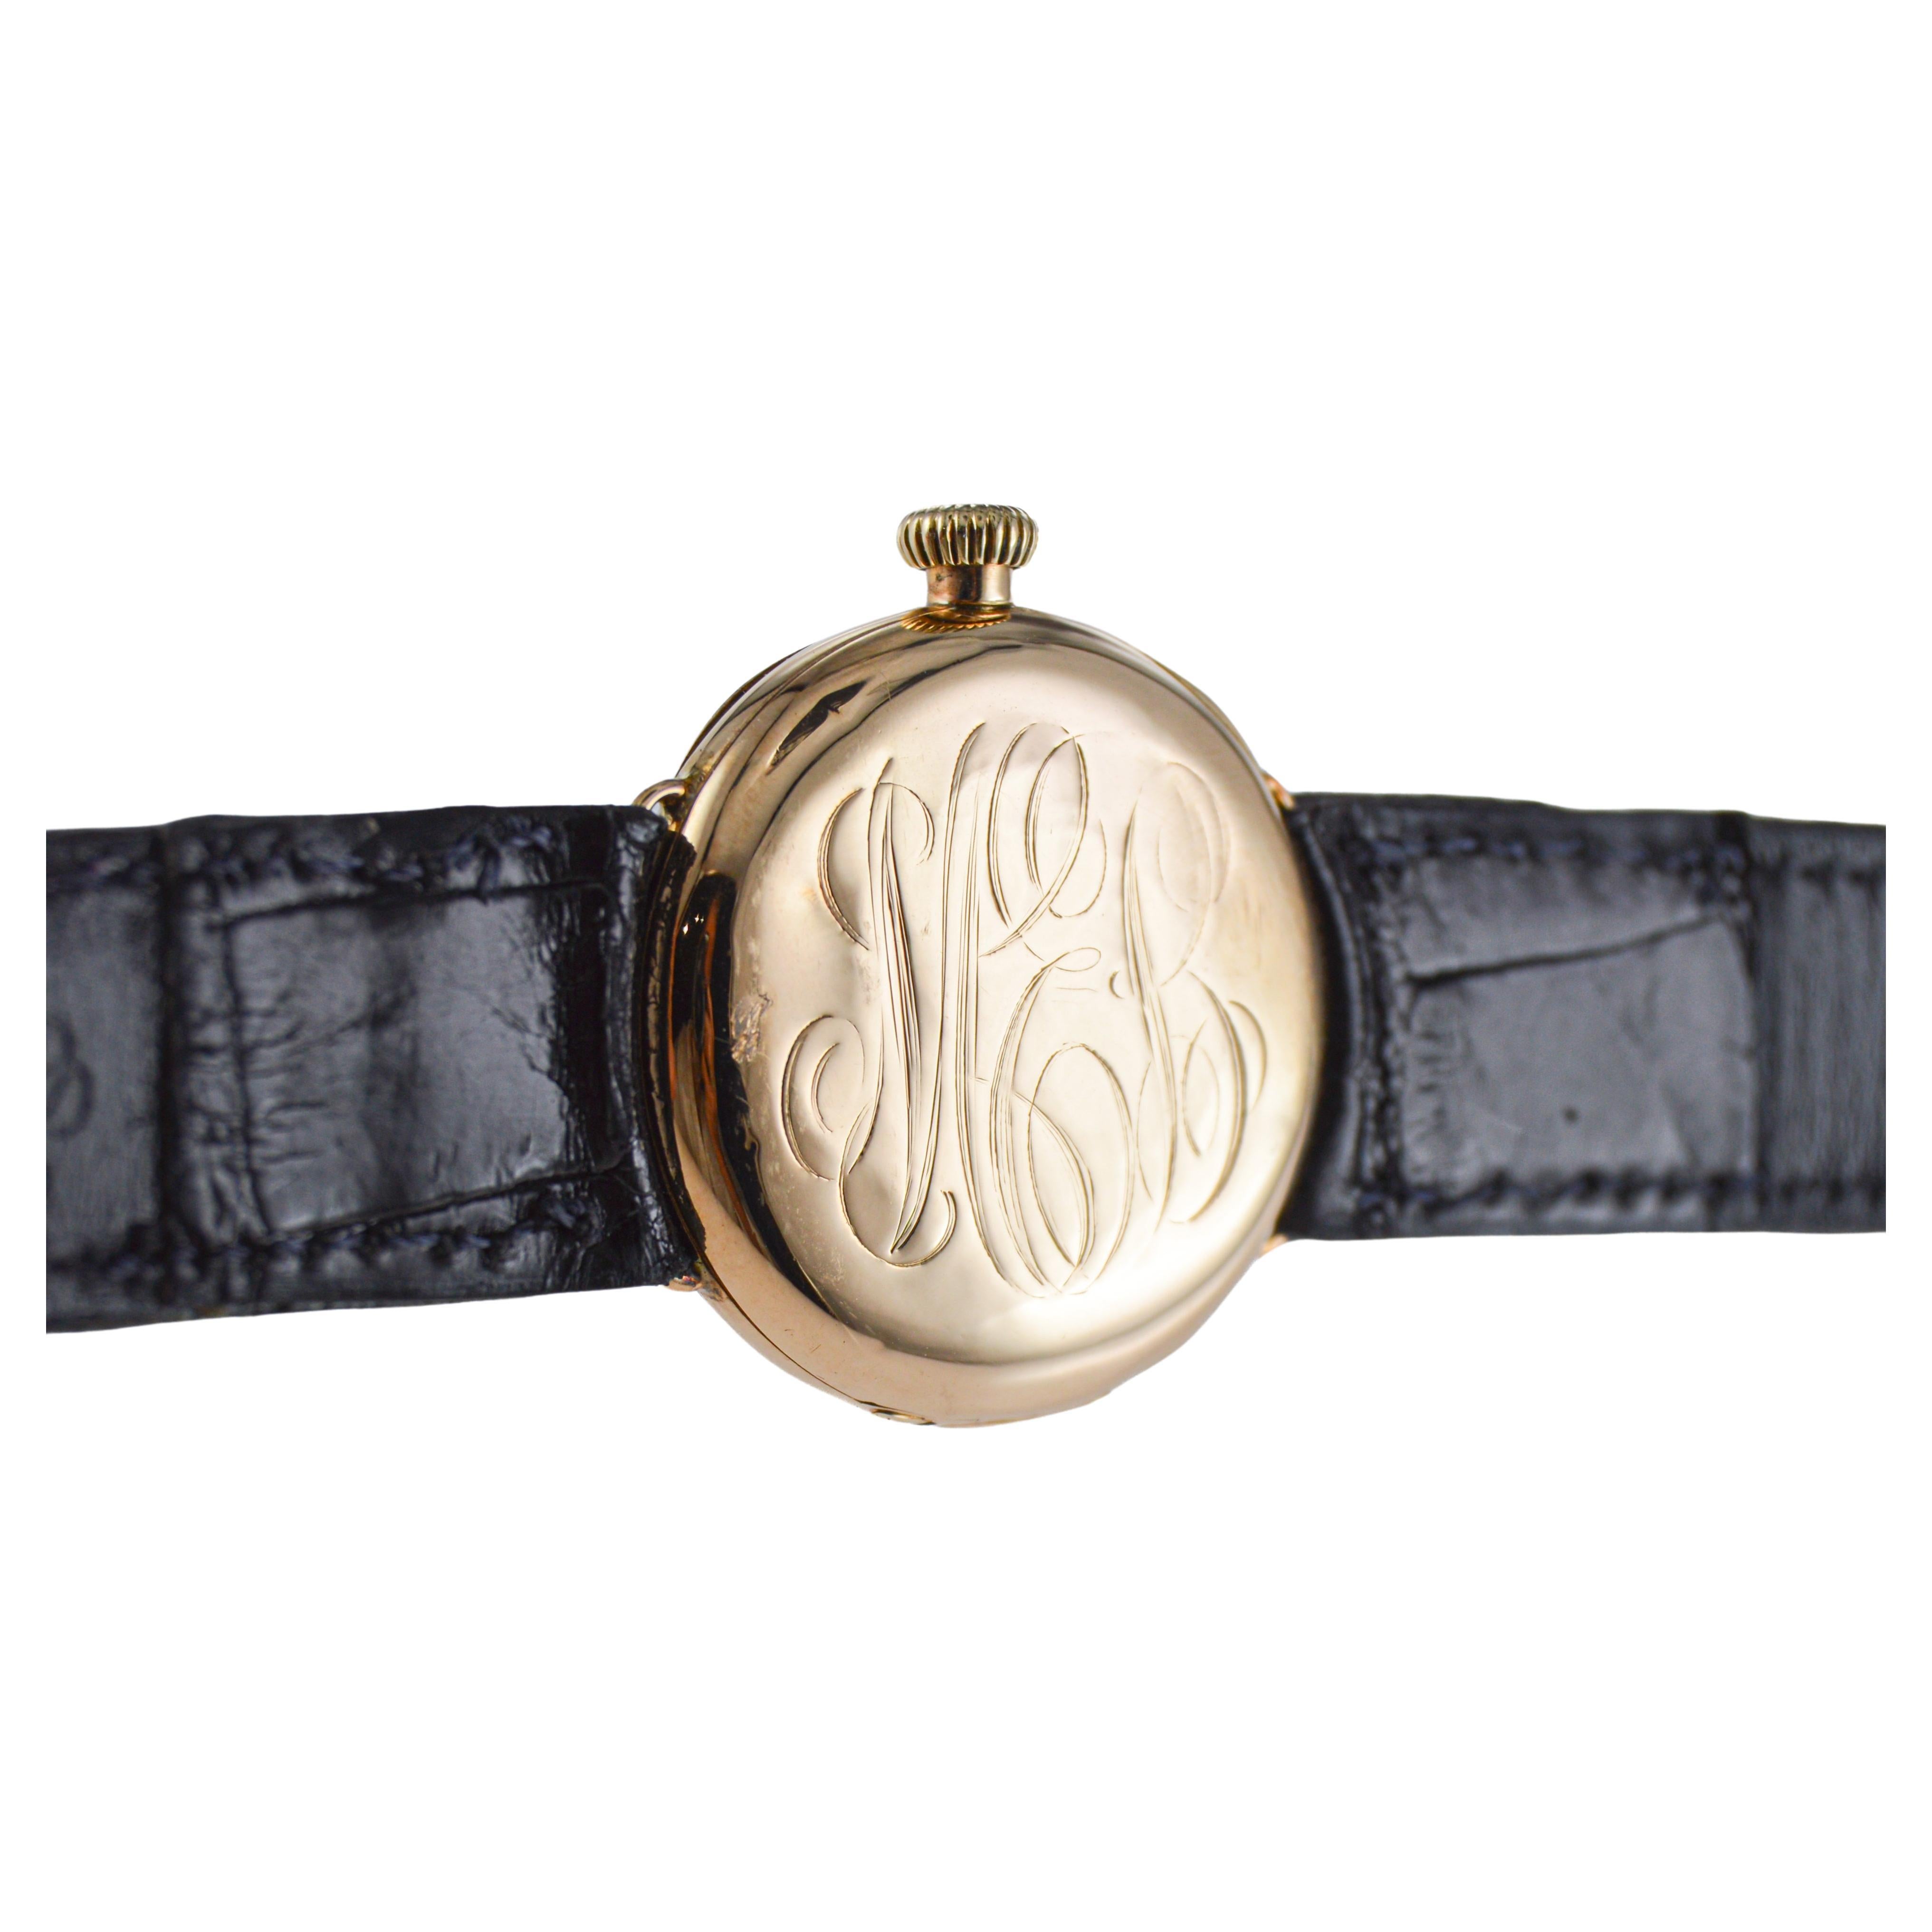 Waltham 14Kt. Solid Gold Art Deco Watch with Original Dial from 1910  For Sale 3